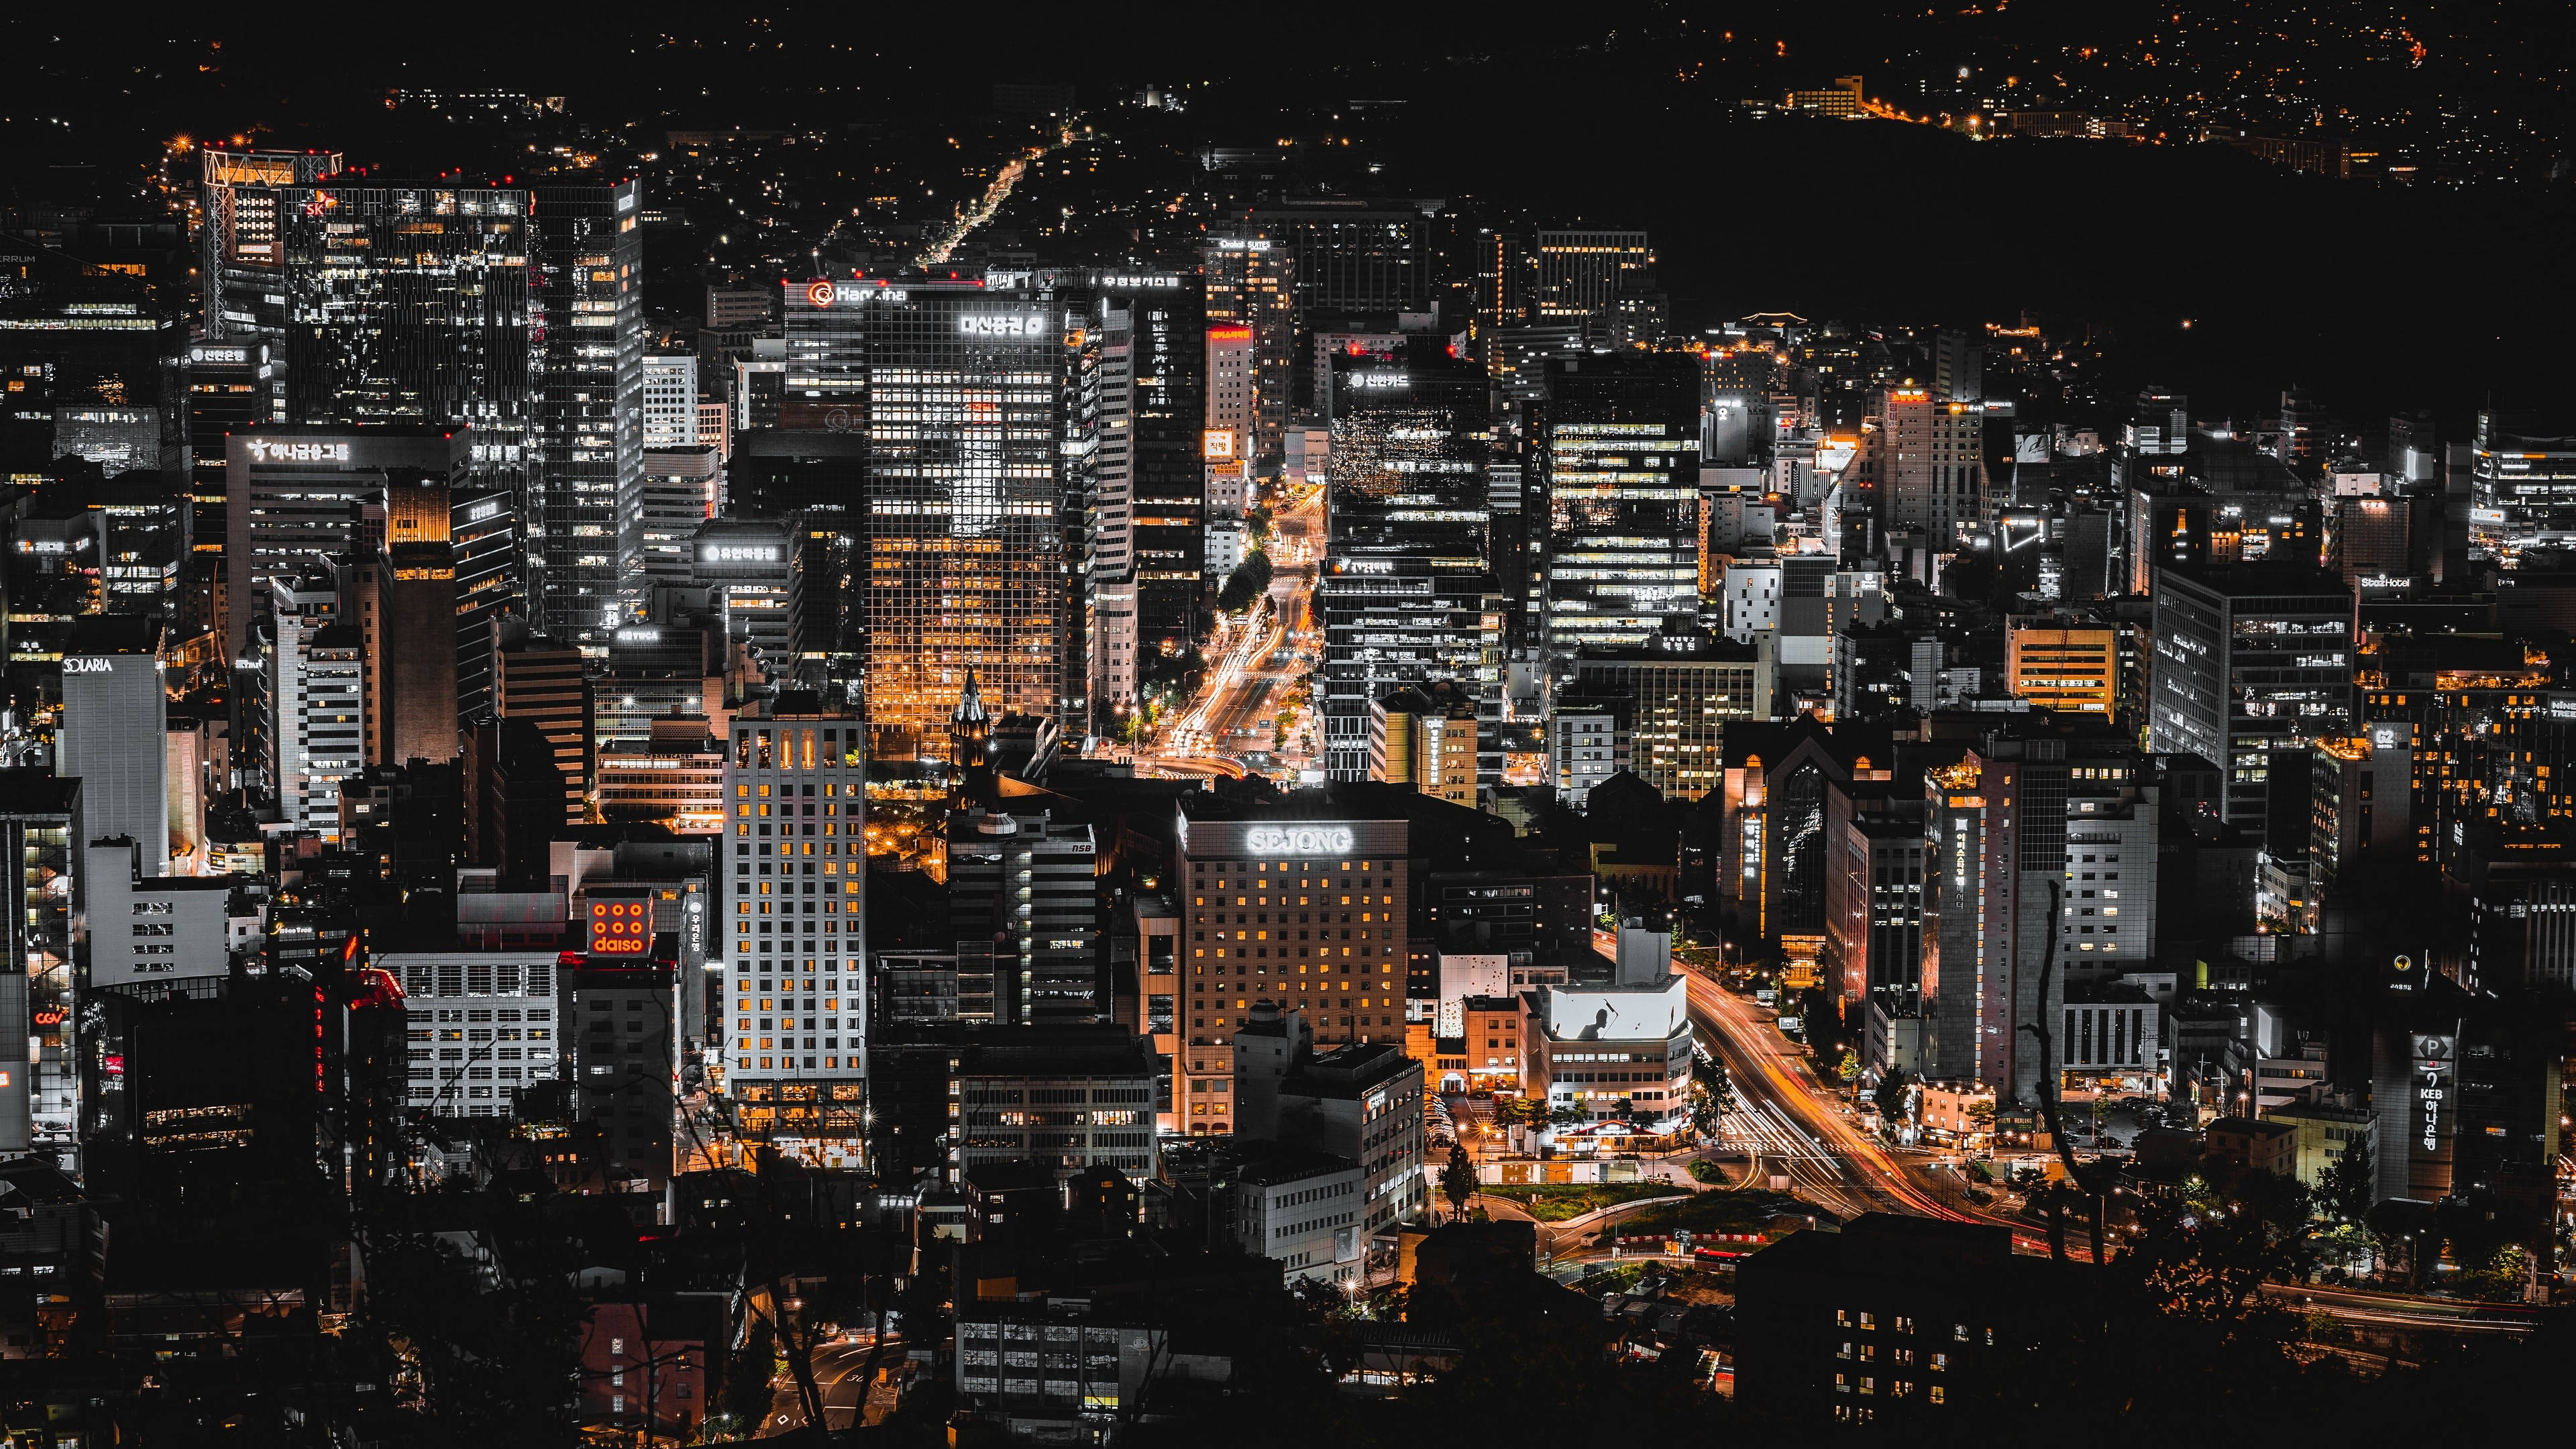 A city at night with many lights on - Night, cityscape, Seoul